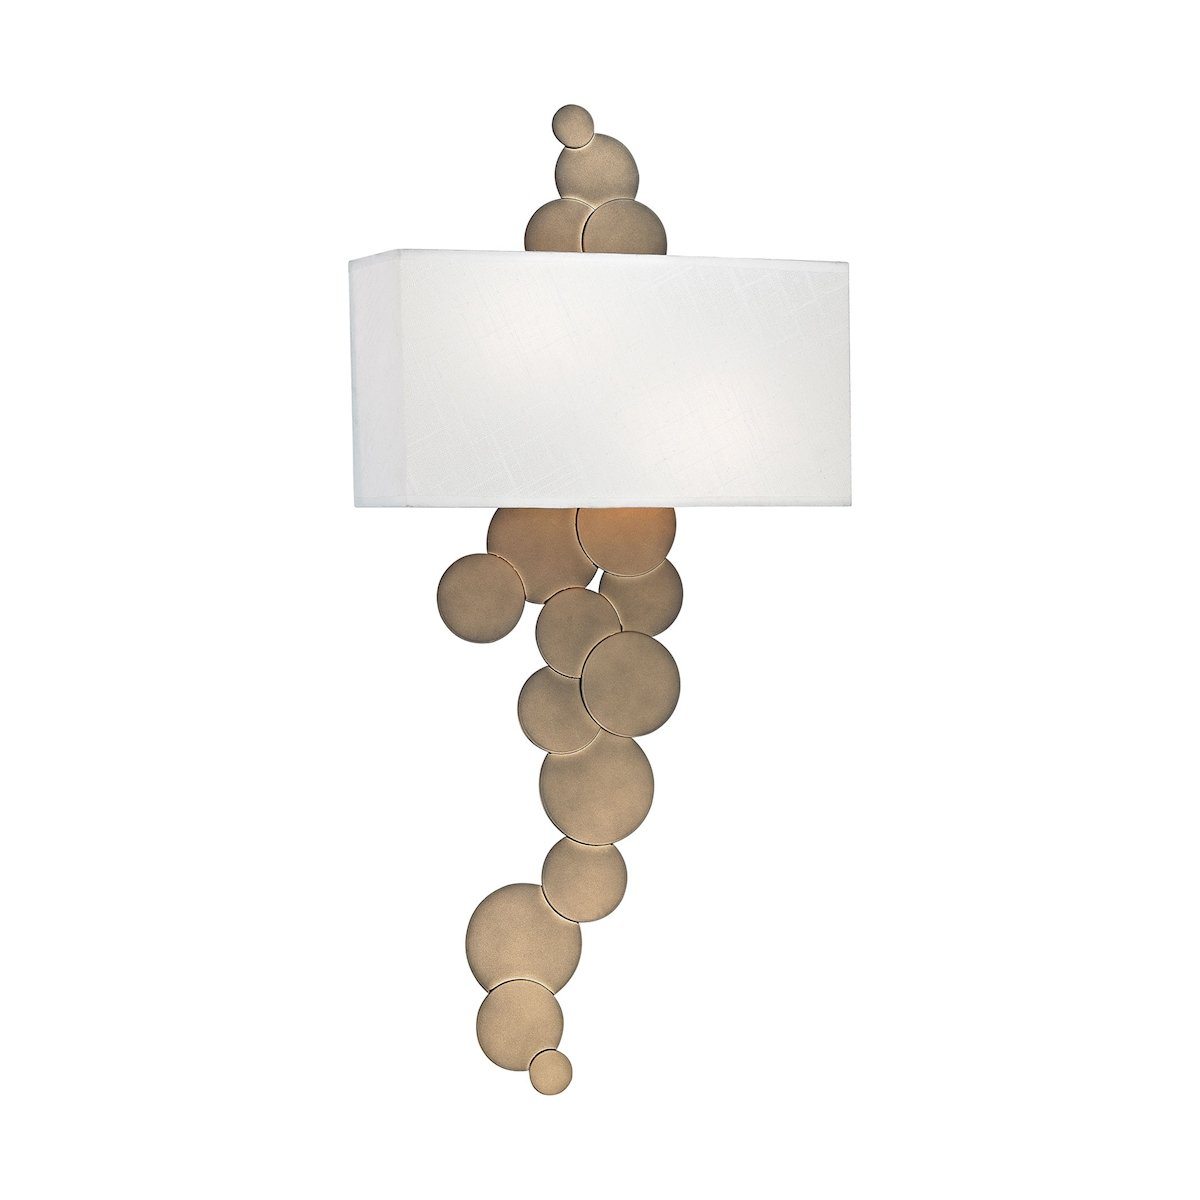 Holepunch 2 Light Wall Sconce In Gold Leaf Wall Dimond Lighting 